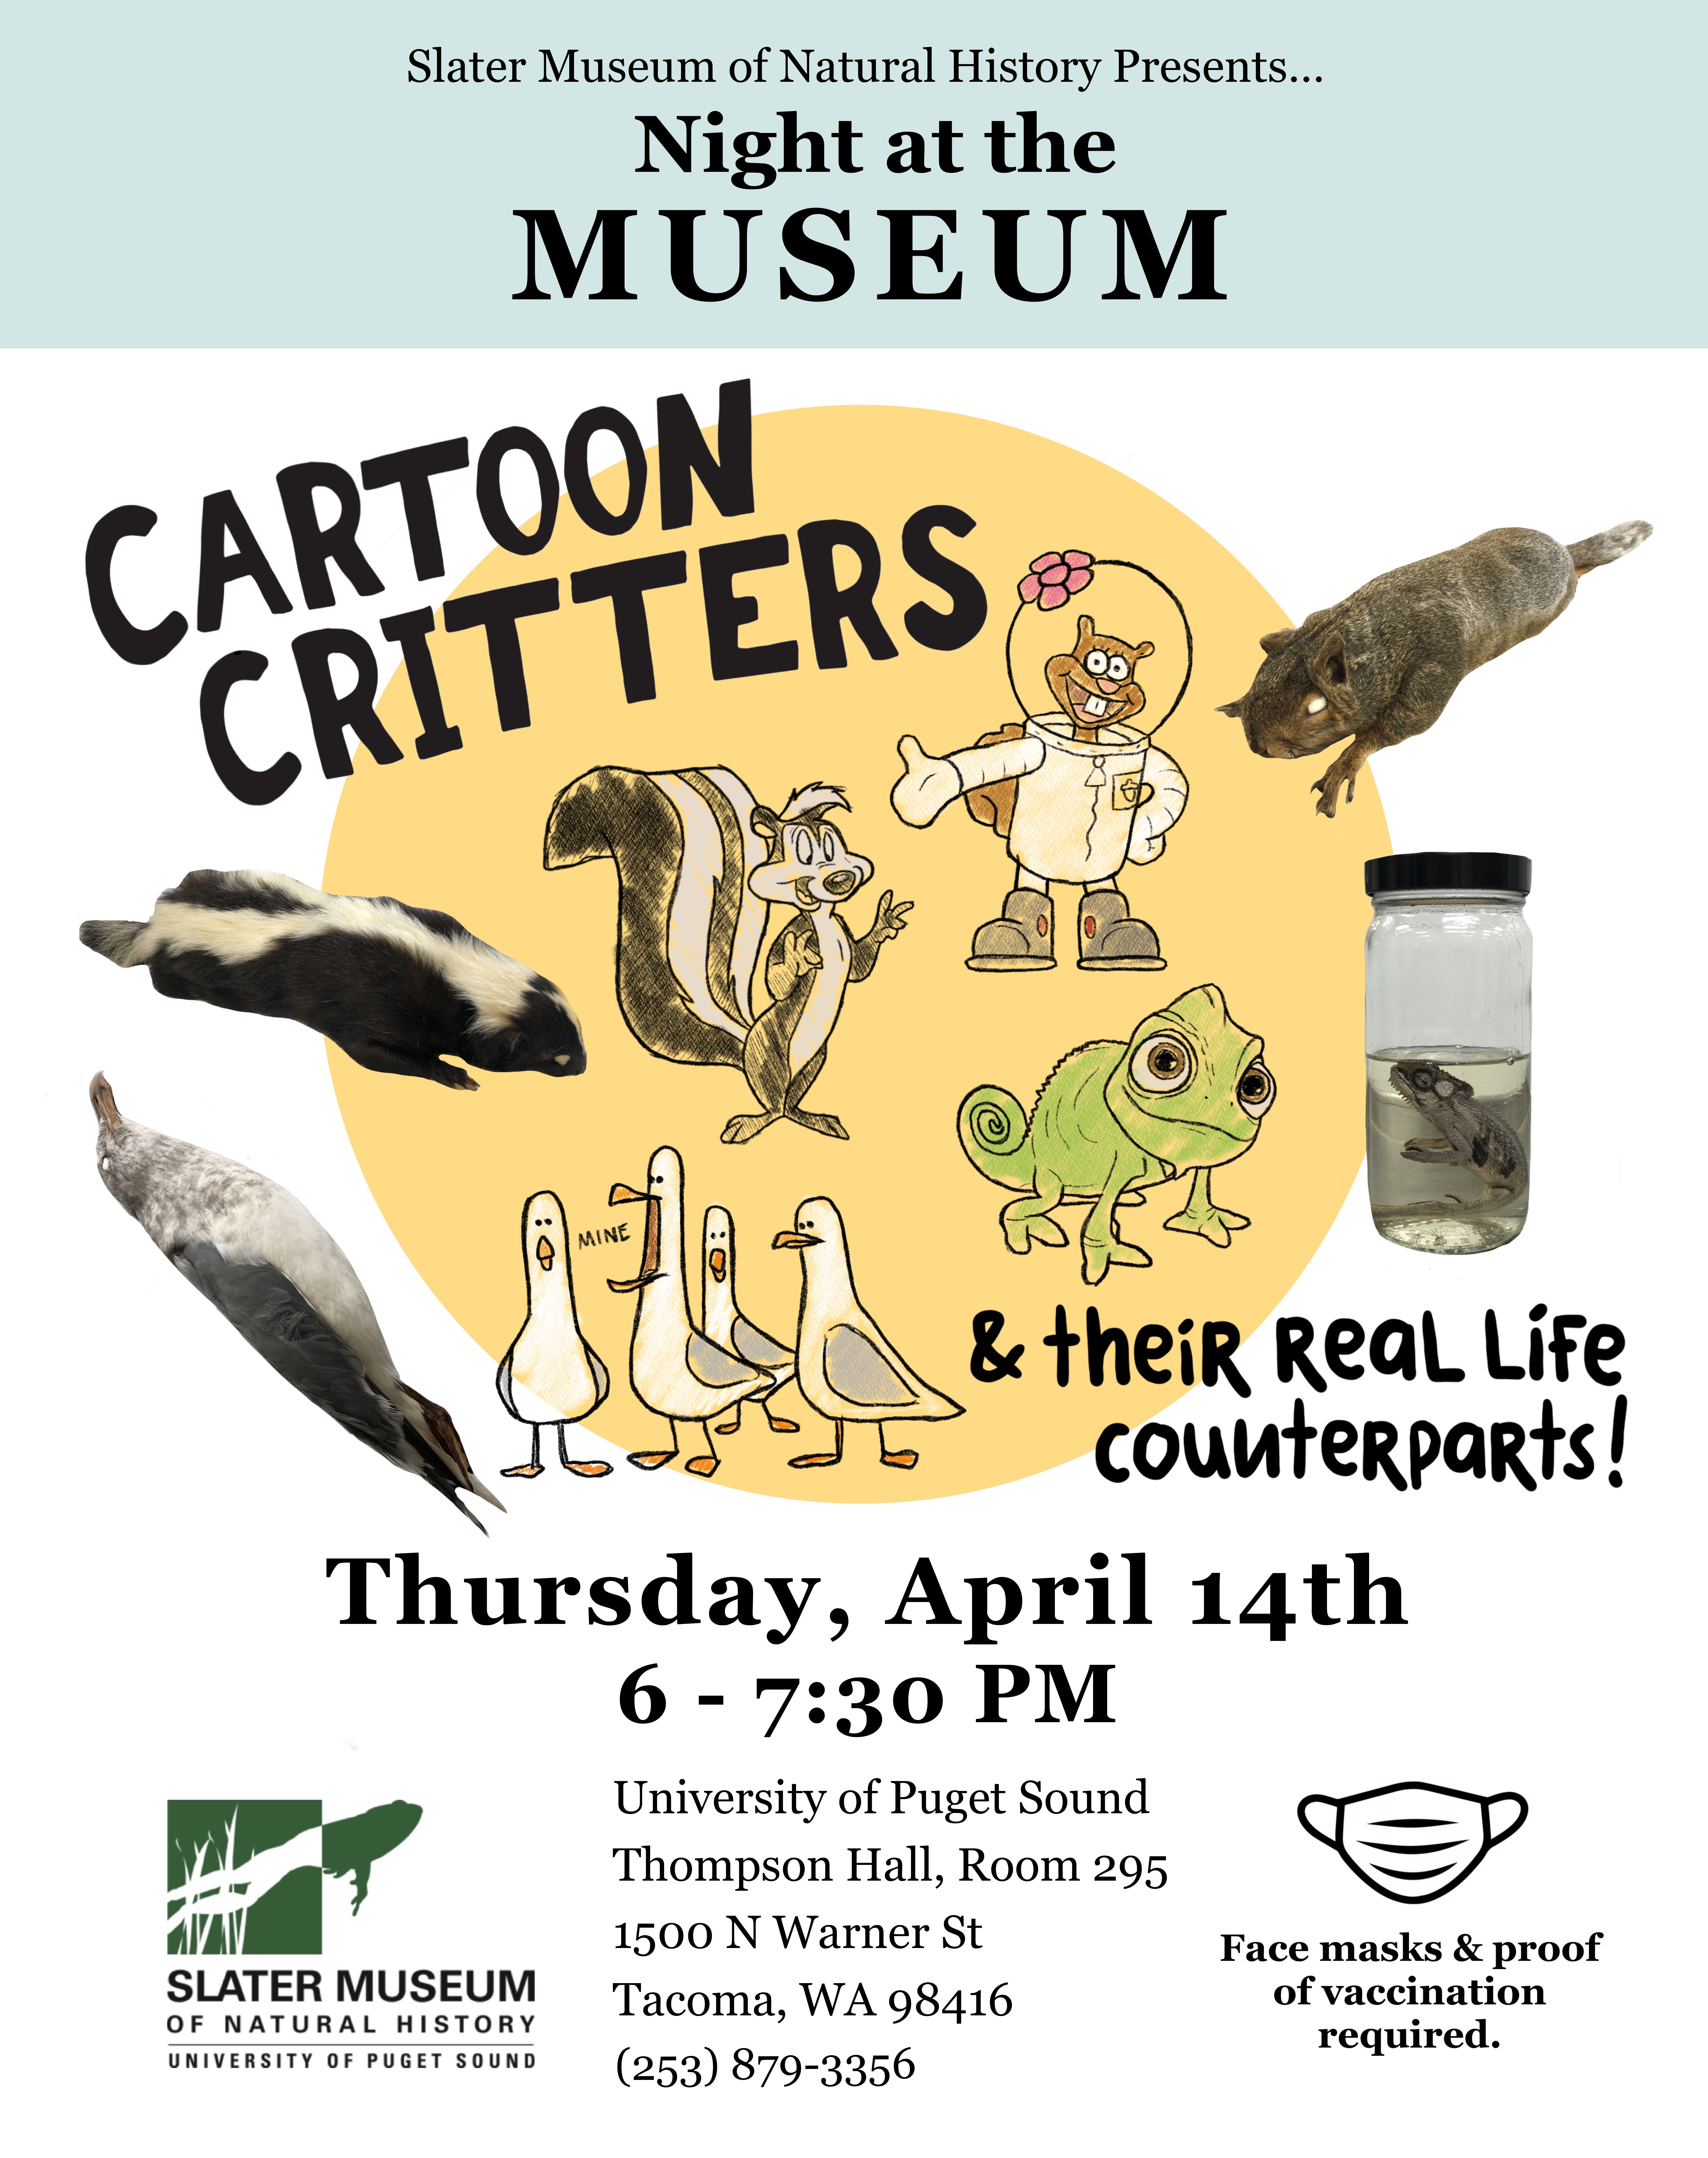 Night at the Museum Cartoon Critters poster